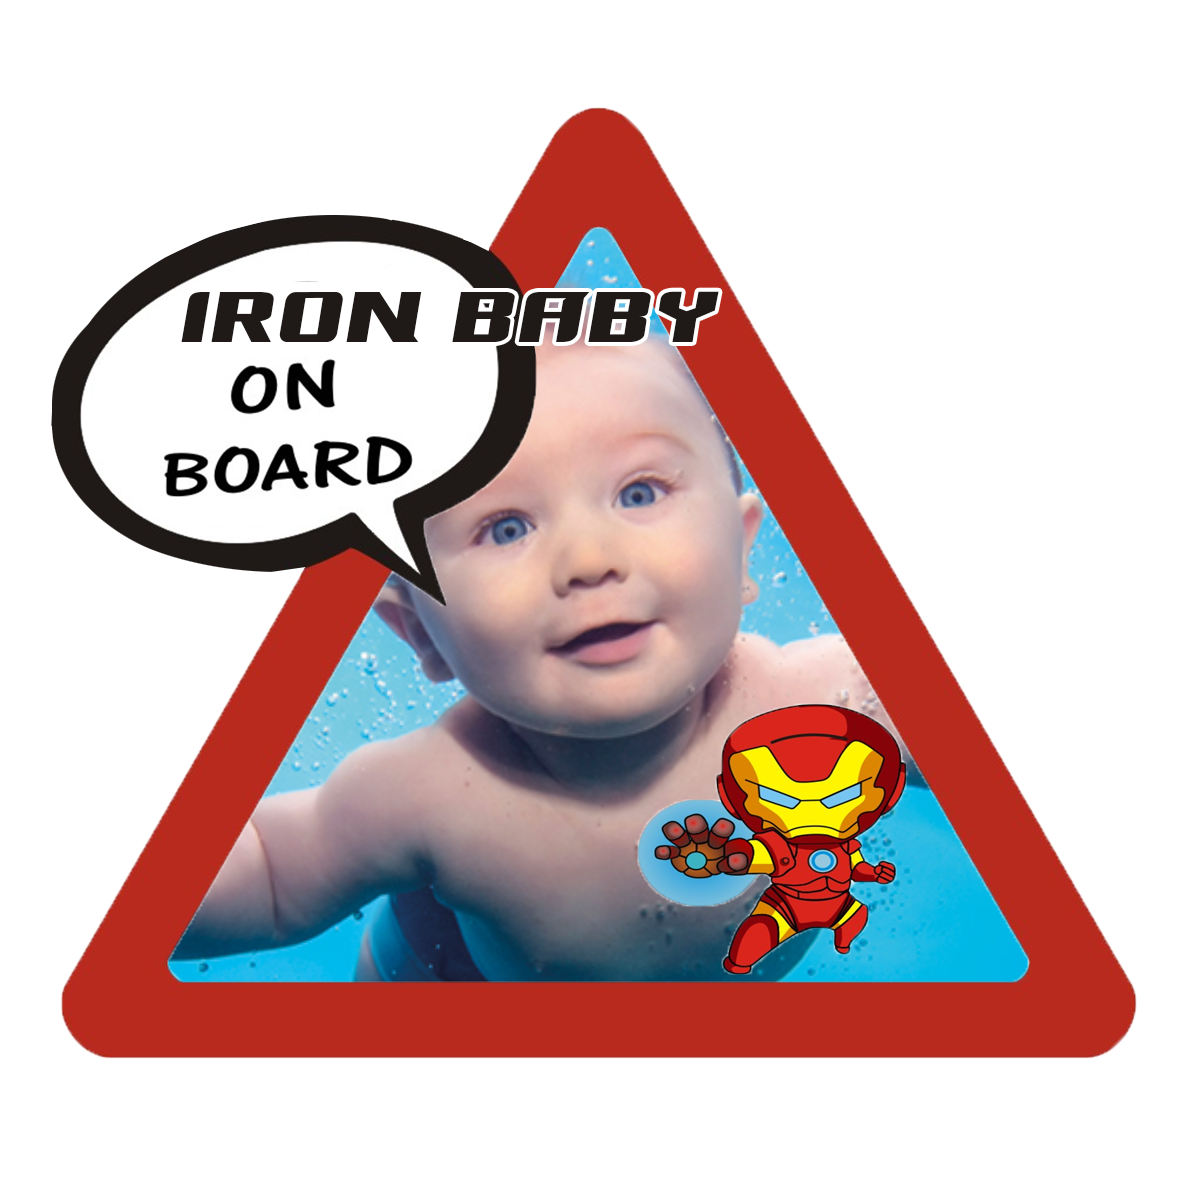 Personalised Iron baby on board Safety Sticker Car Vinyl Stickers Decals Accessories